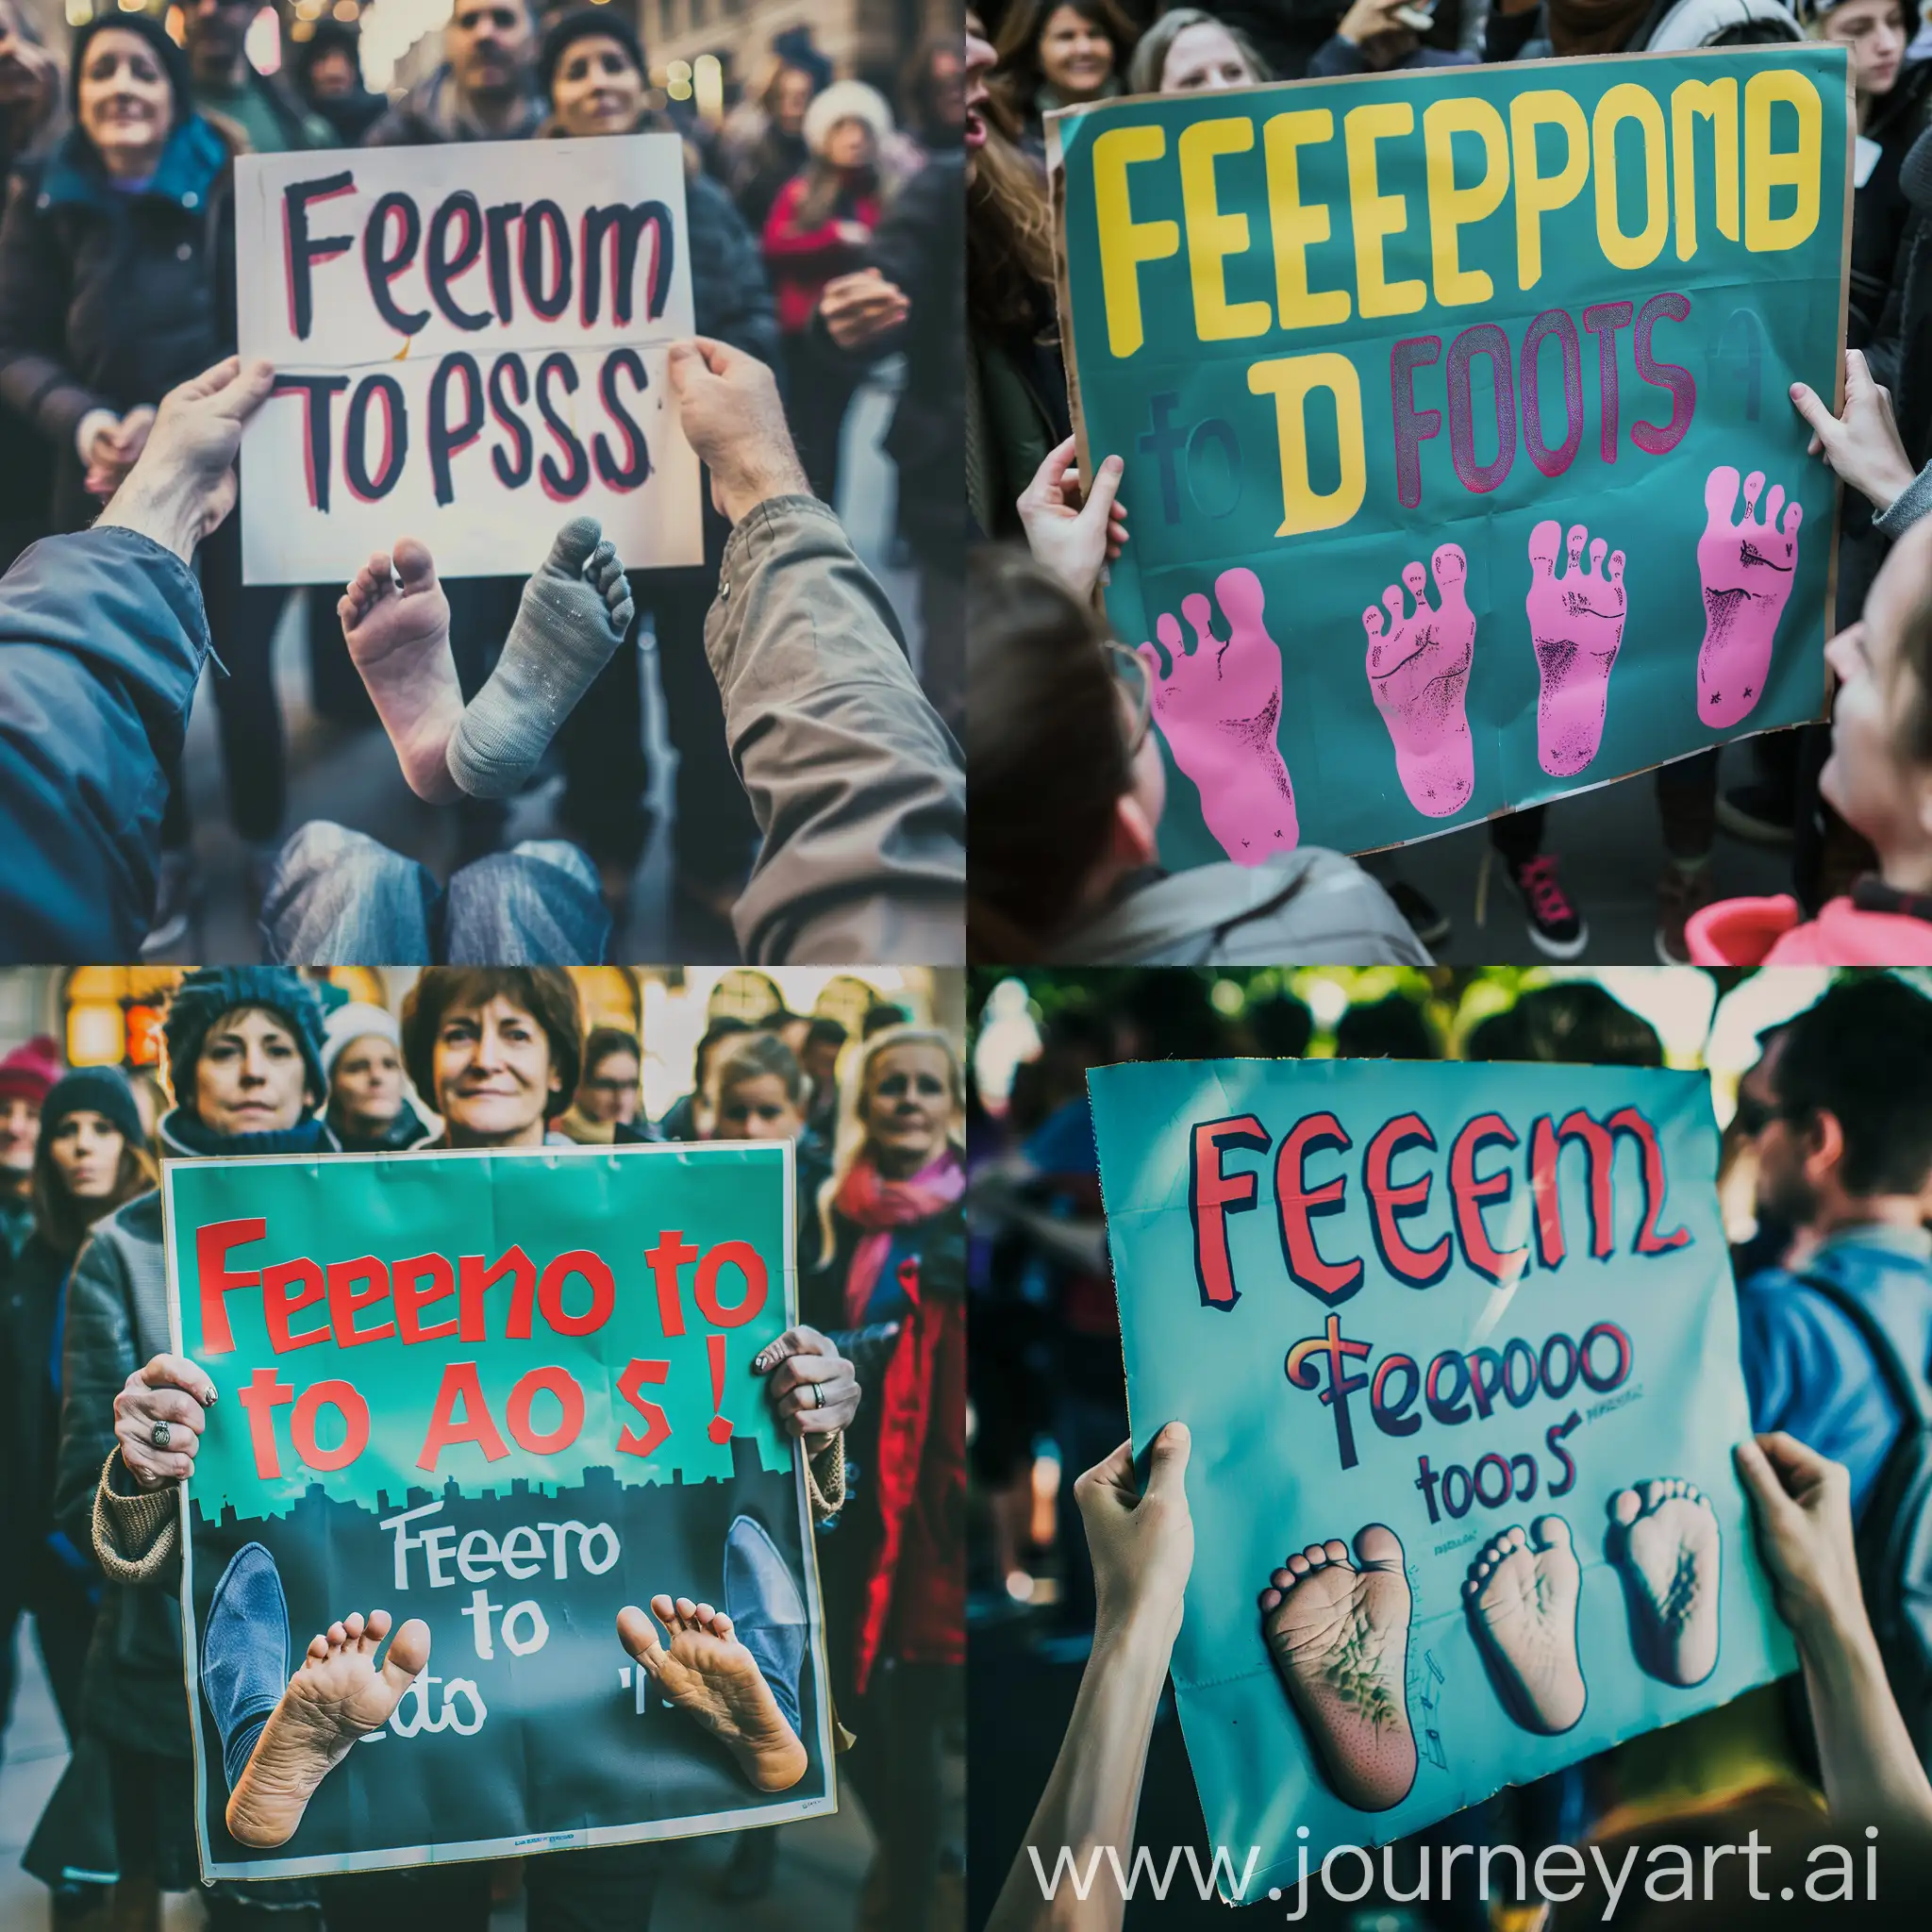 Supporters-Rally-for-Freedom-to-Feets-with-Poster